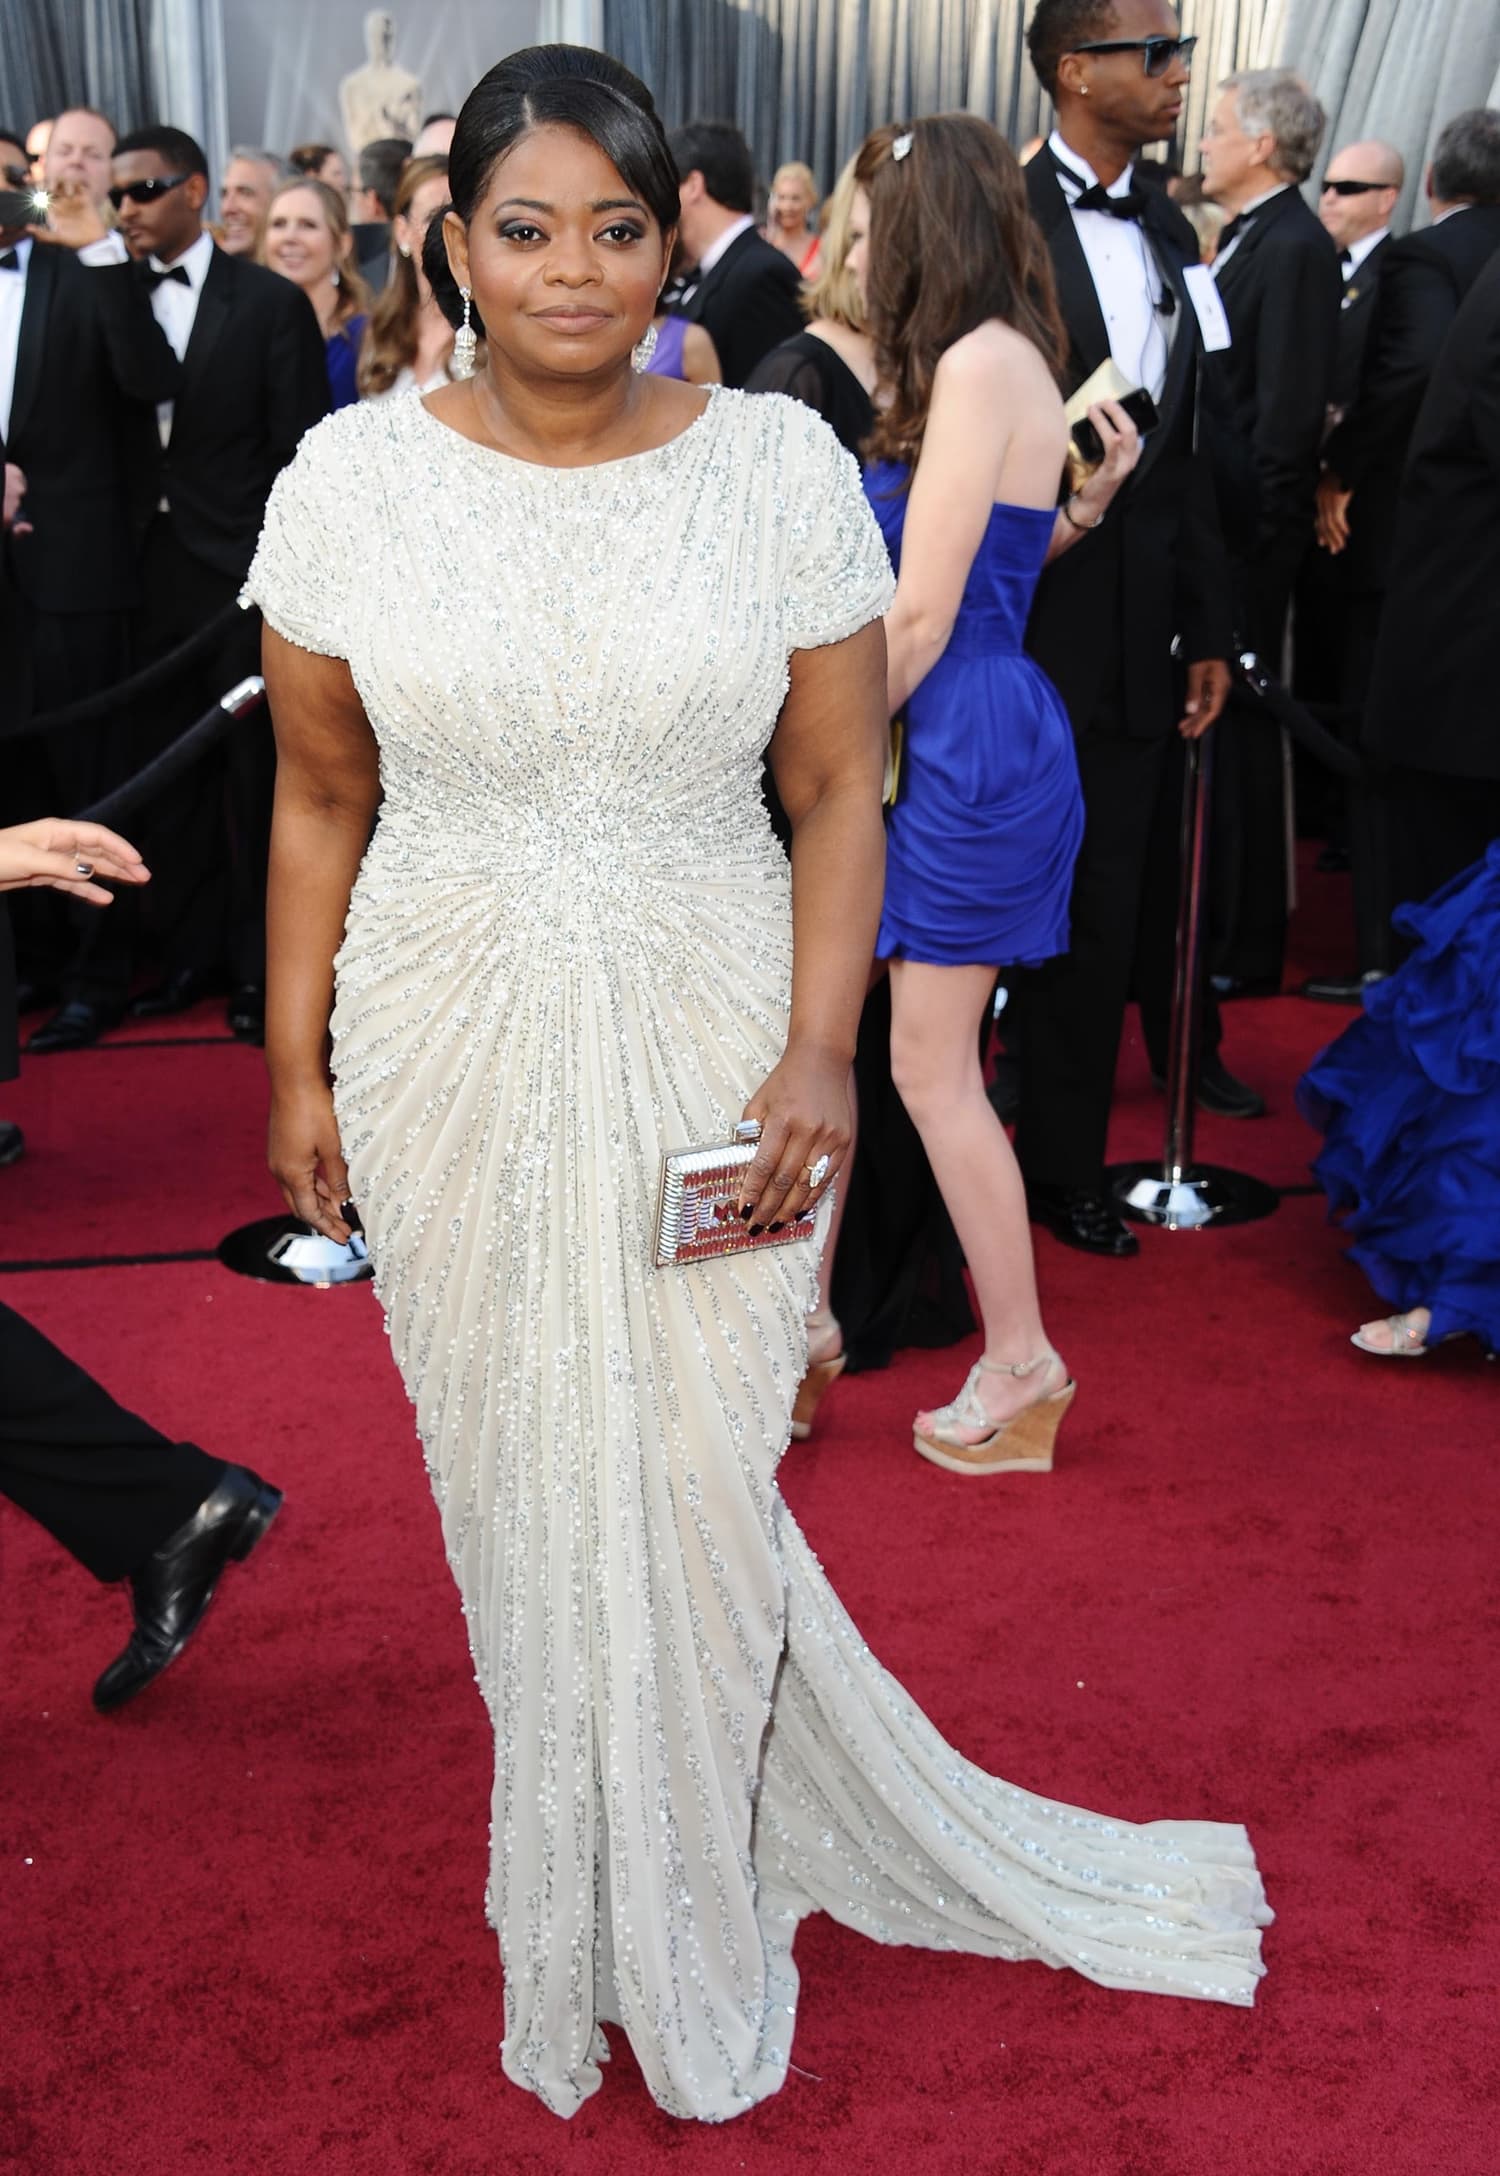 Octavia Spencer in a Tadashi Shoji dress with Jimmy Choo shoes, Neil Lane jewelry, and a Judith Leiber clutch at the 84th Annual Academy Awards